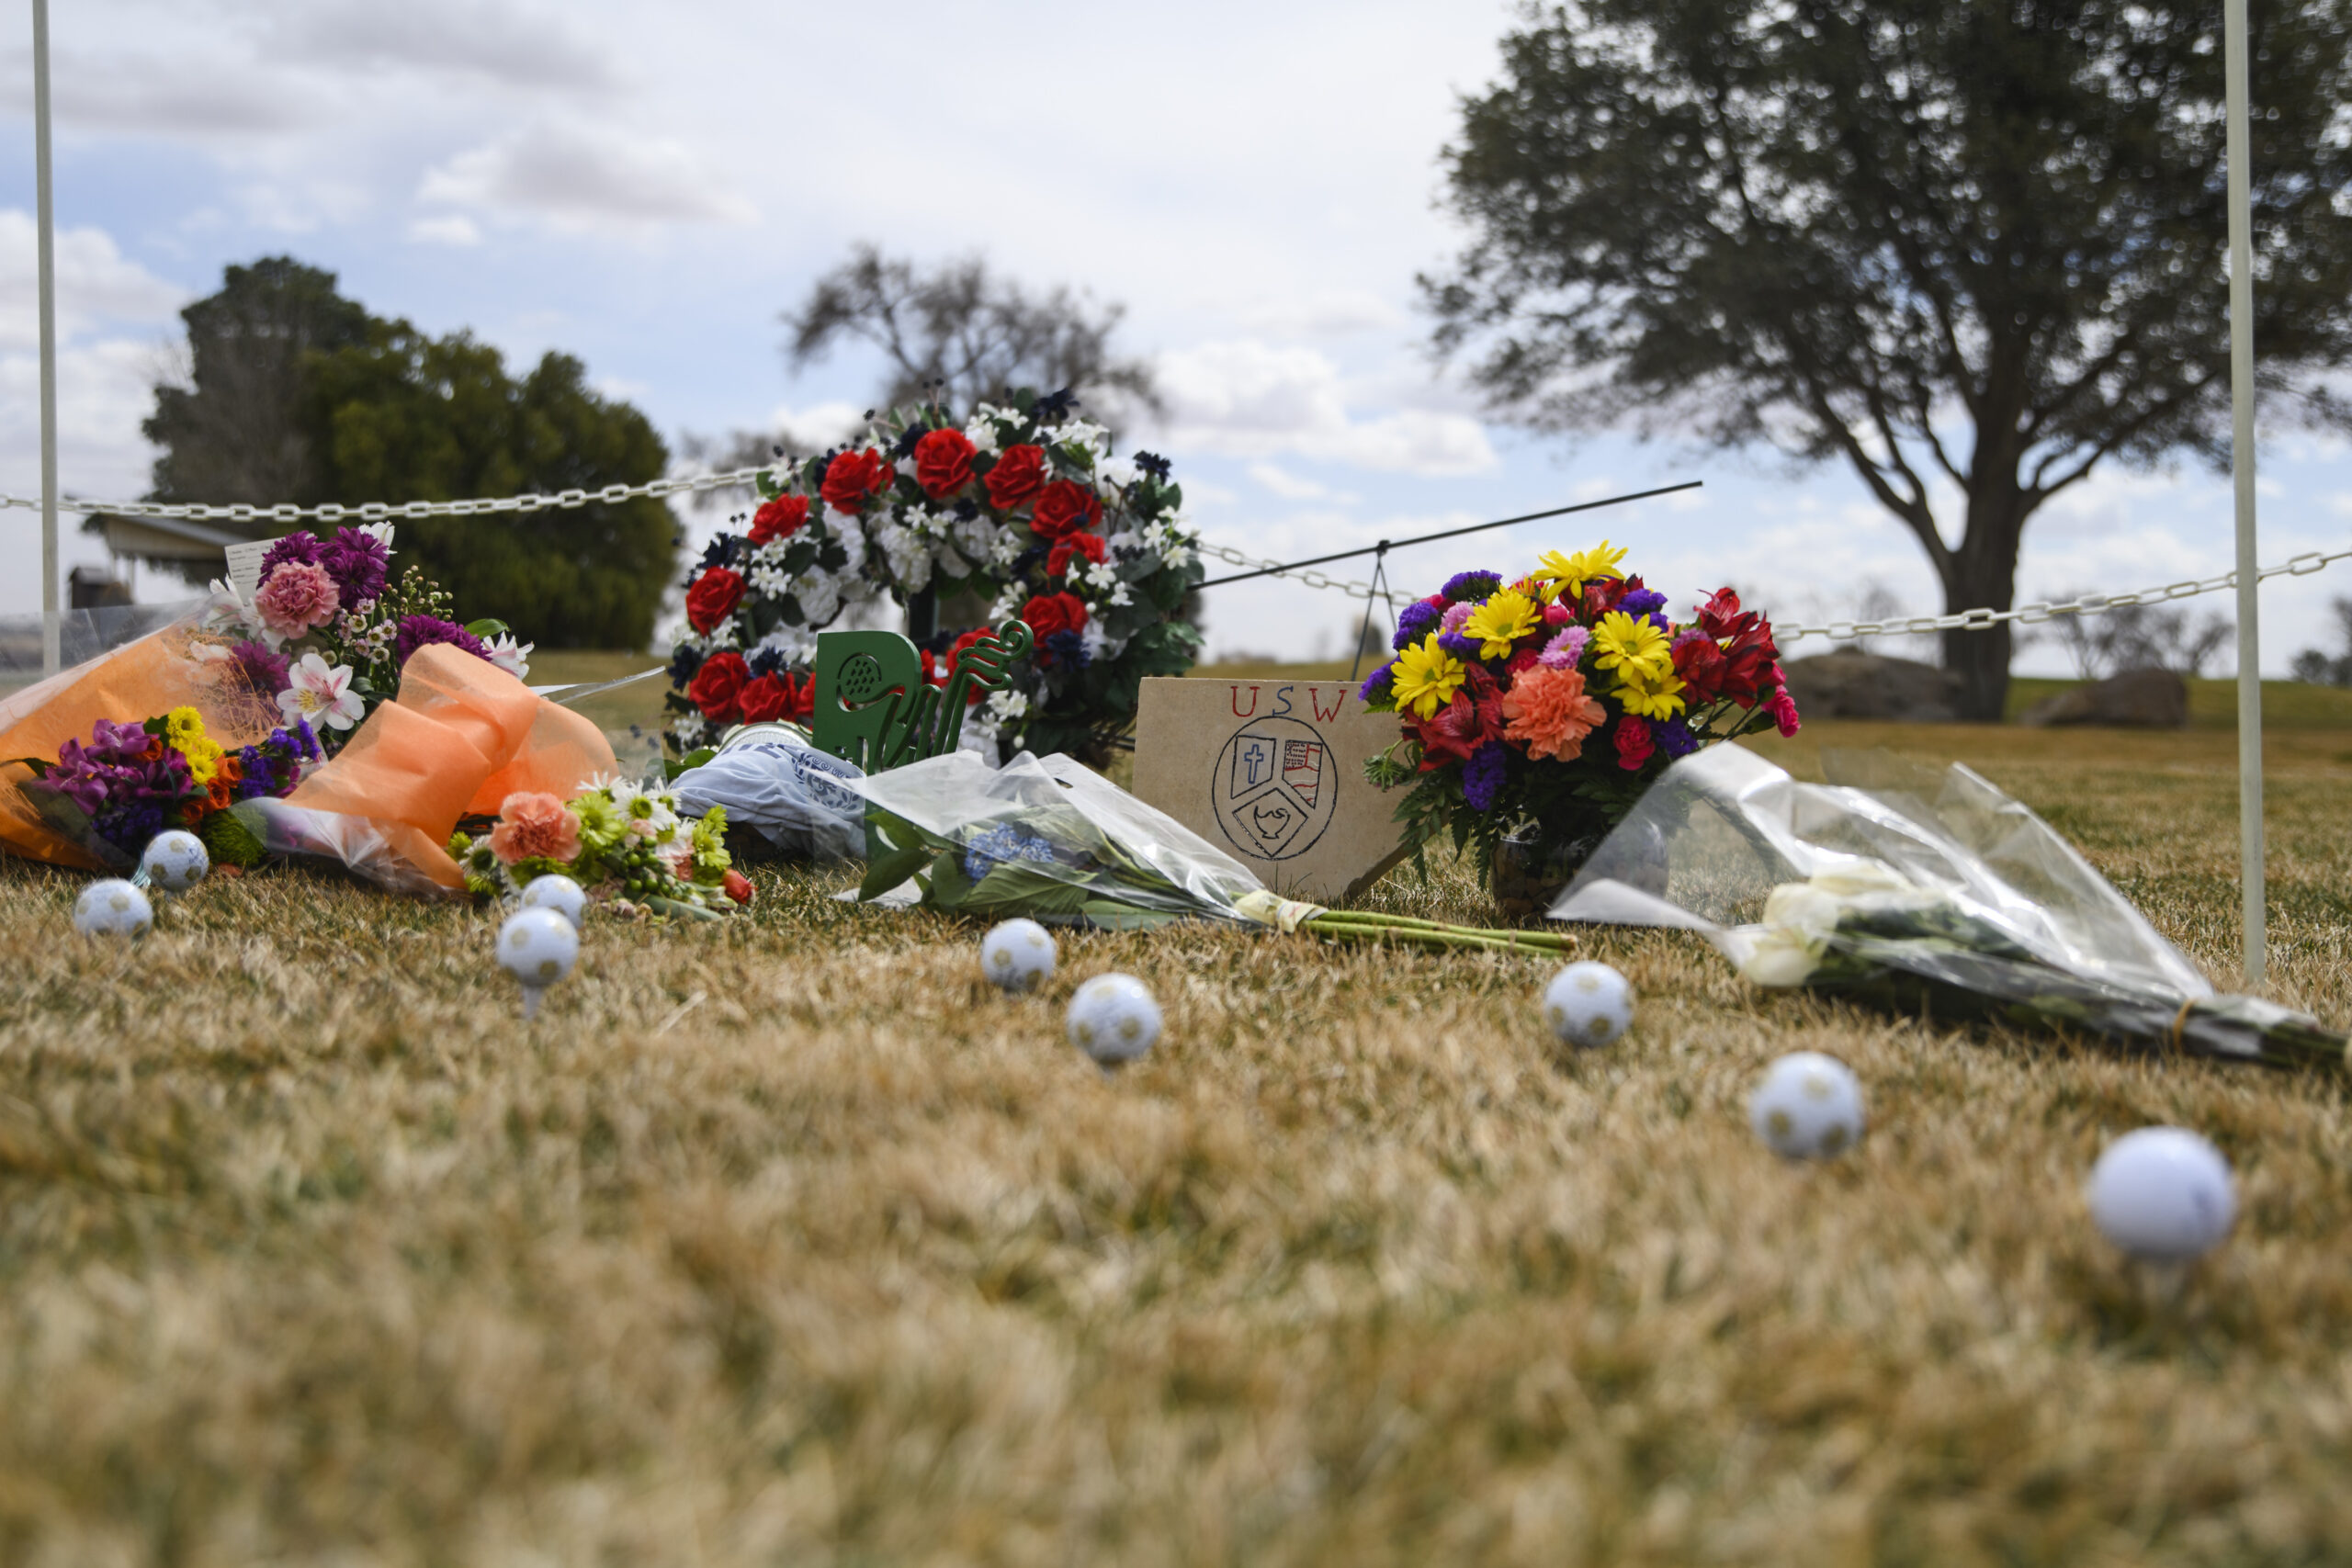 A memorial erected in honor of the University of the Southwest golf teams car wreck is seen Thursday, March 17, 2022 at the Rockwind Community Links in Hobbs, N.M. Late Tuesday, the University of the Southwest men's and women's golf teams were involved in a fatal car crash half a mile north of State Highway 115 on Farm-to-Market Road 1788 in Andrews County while on the way back from tournament play in Midland. Nine people were killed in the wreck including six students, one coach, and two in a pickup that collided head-on with the university's van. (Eli Hartman/Odessa American via AP)